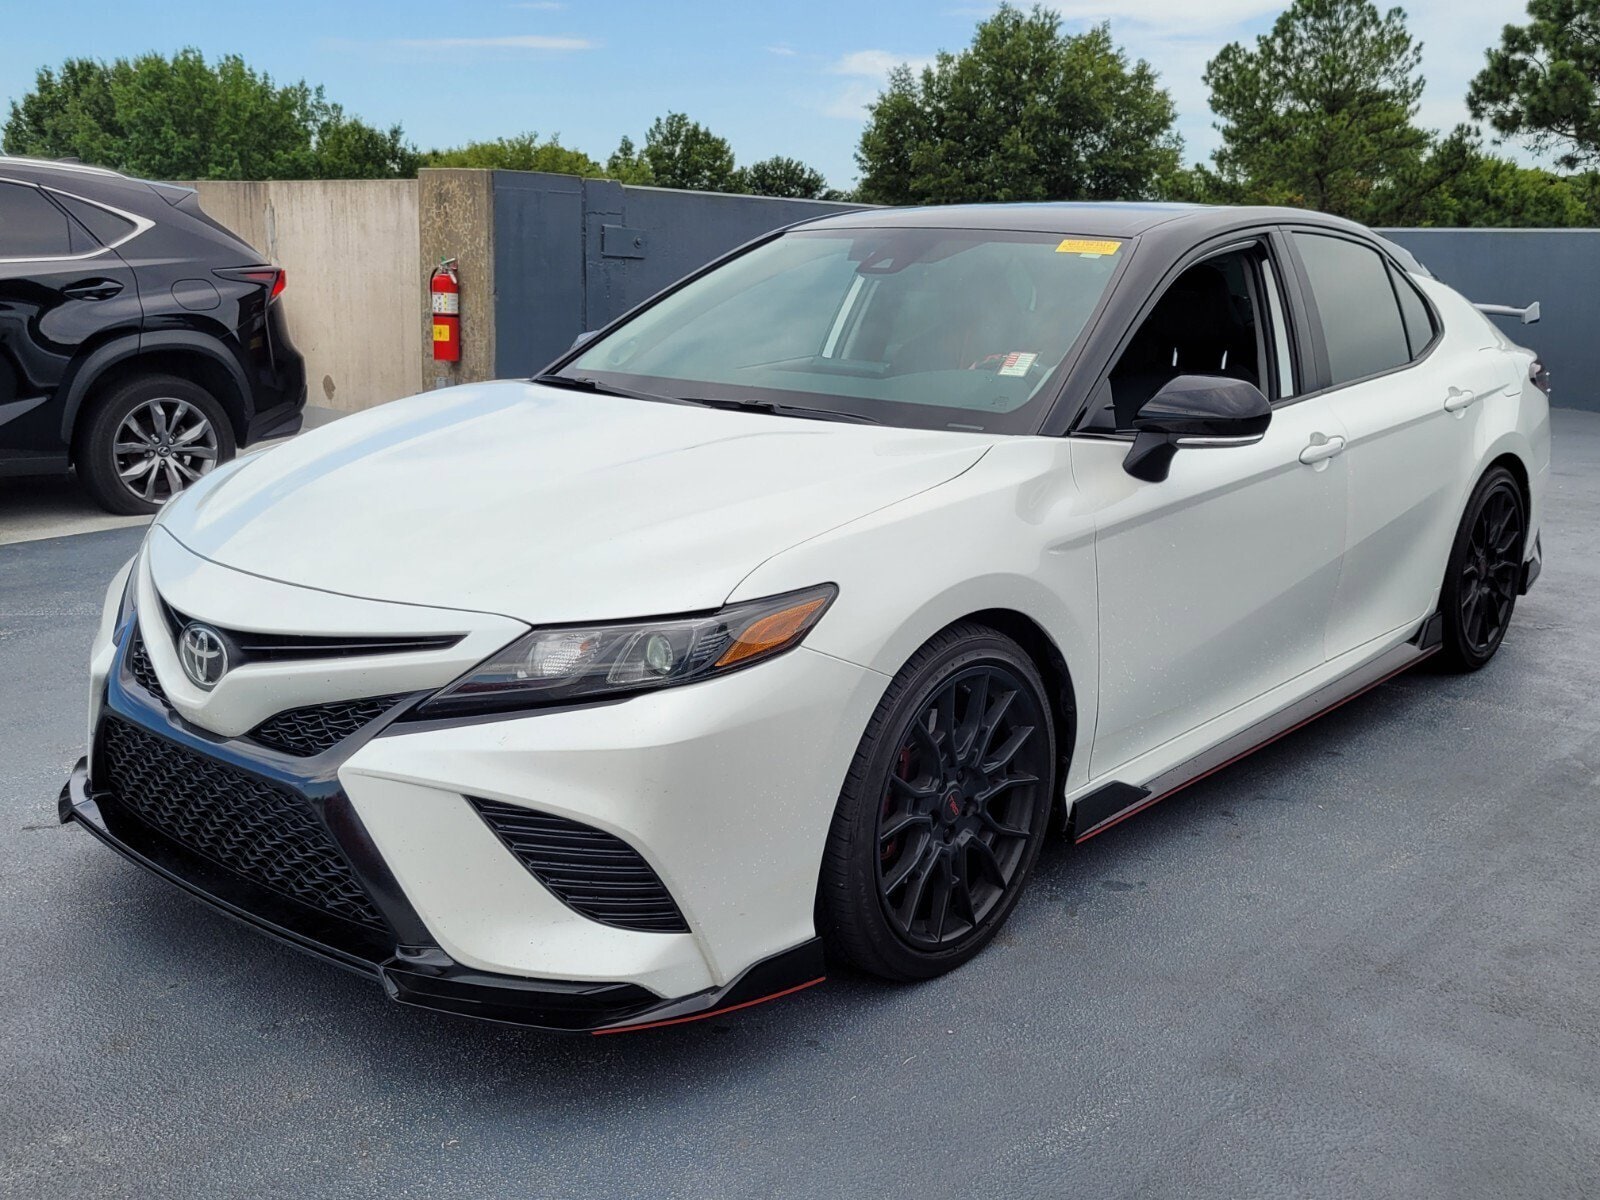 Used 2021 Toyota Camry TRD with VIN 4T1KZ1AK2MU050896 for sale in Smyrna, GA